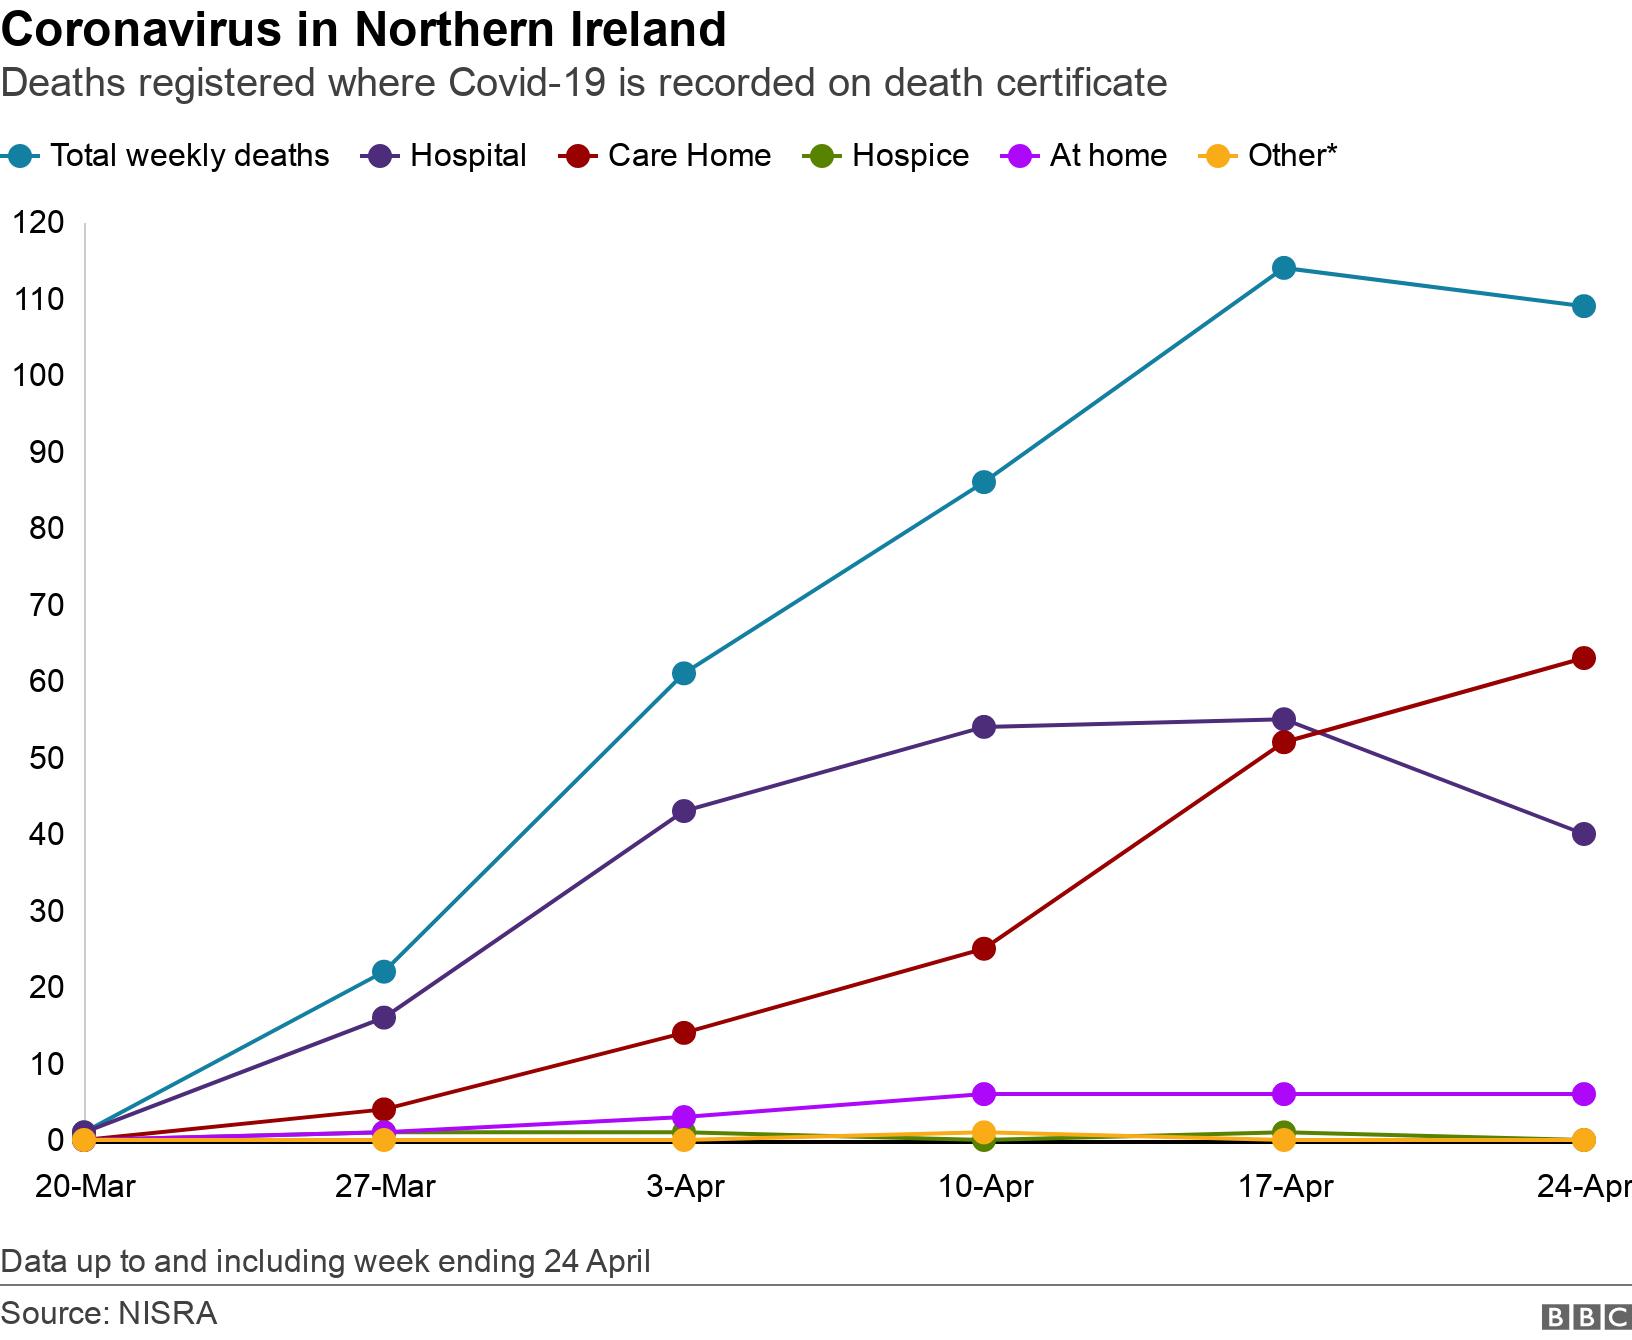 Coronavirus in Northern Ireland. Deaths registered where Covid-19 is recorded on death certificate. Graph showing place of death over time Data up to and including week ending 24 April.